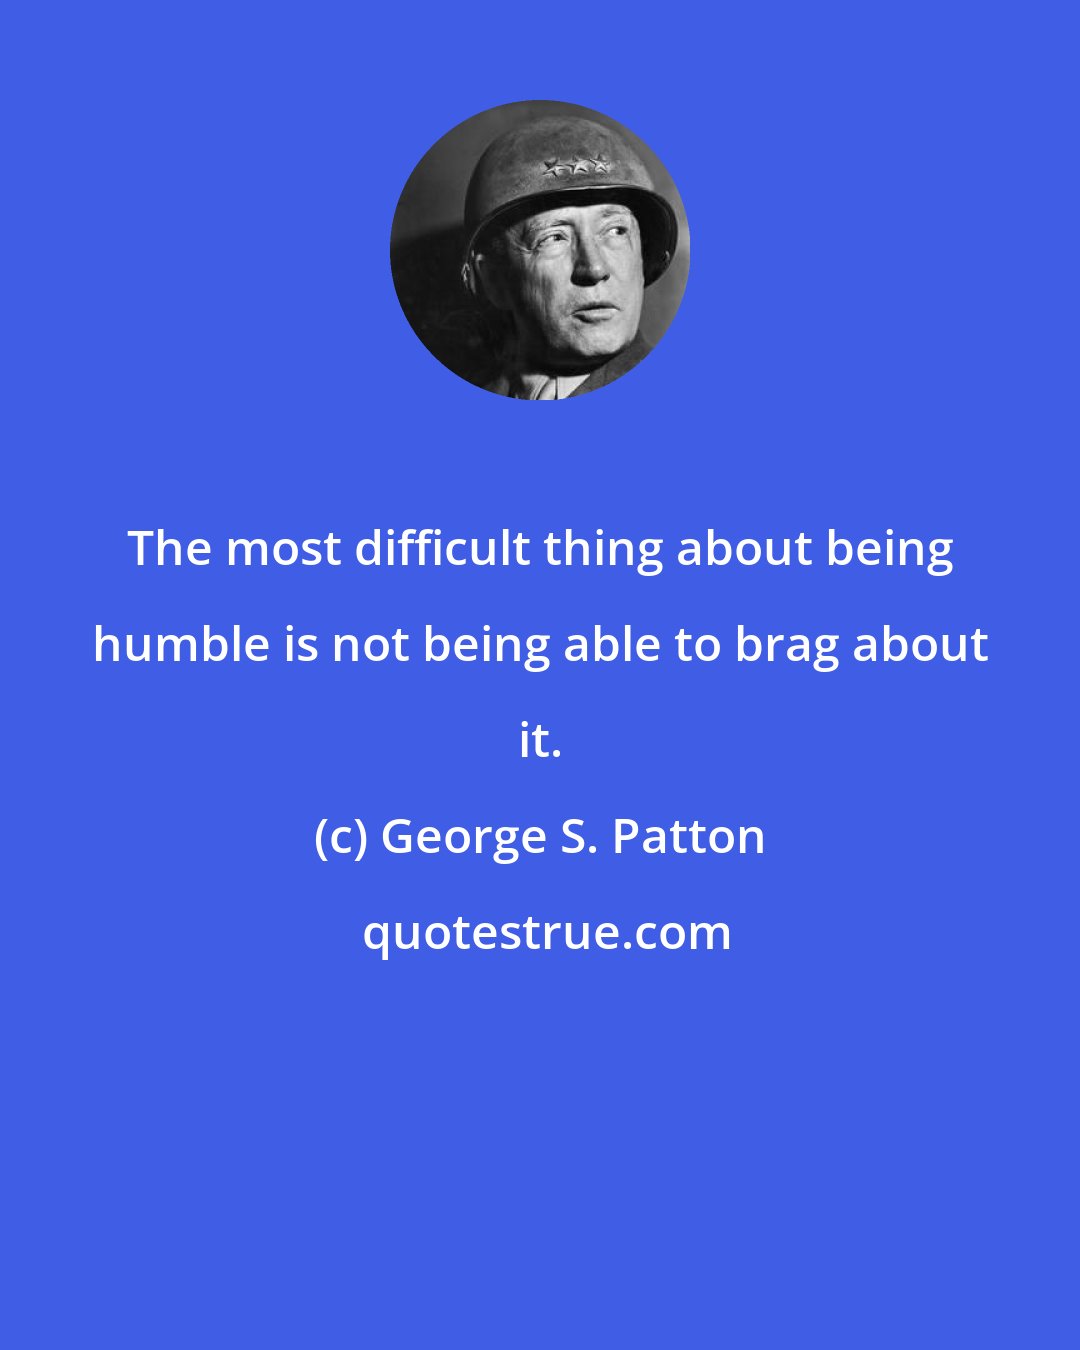 George S. Patton: The most difficult thing about being humble is not being able to brag about it.